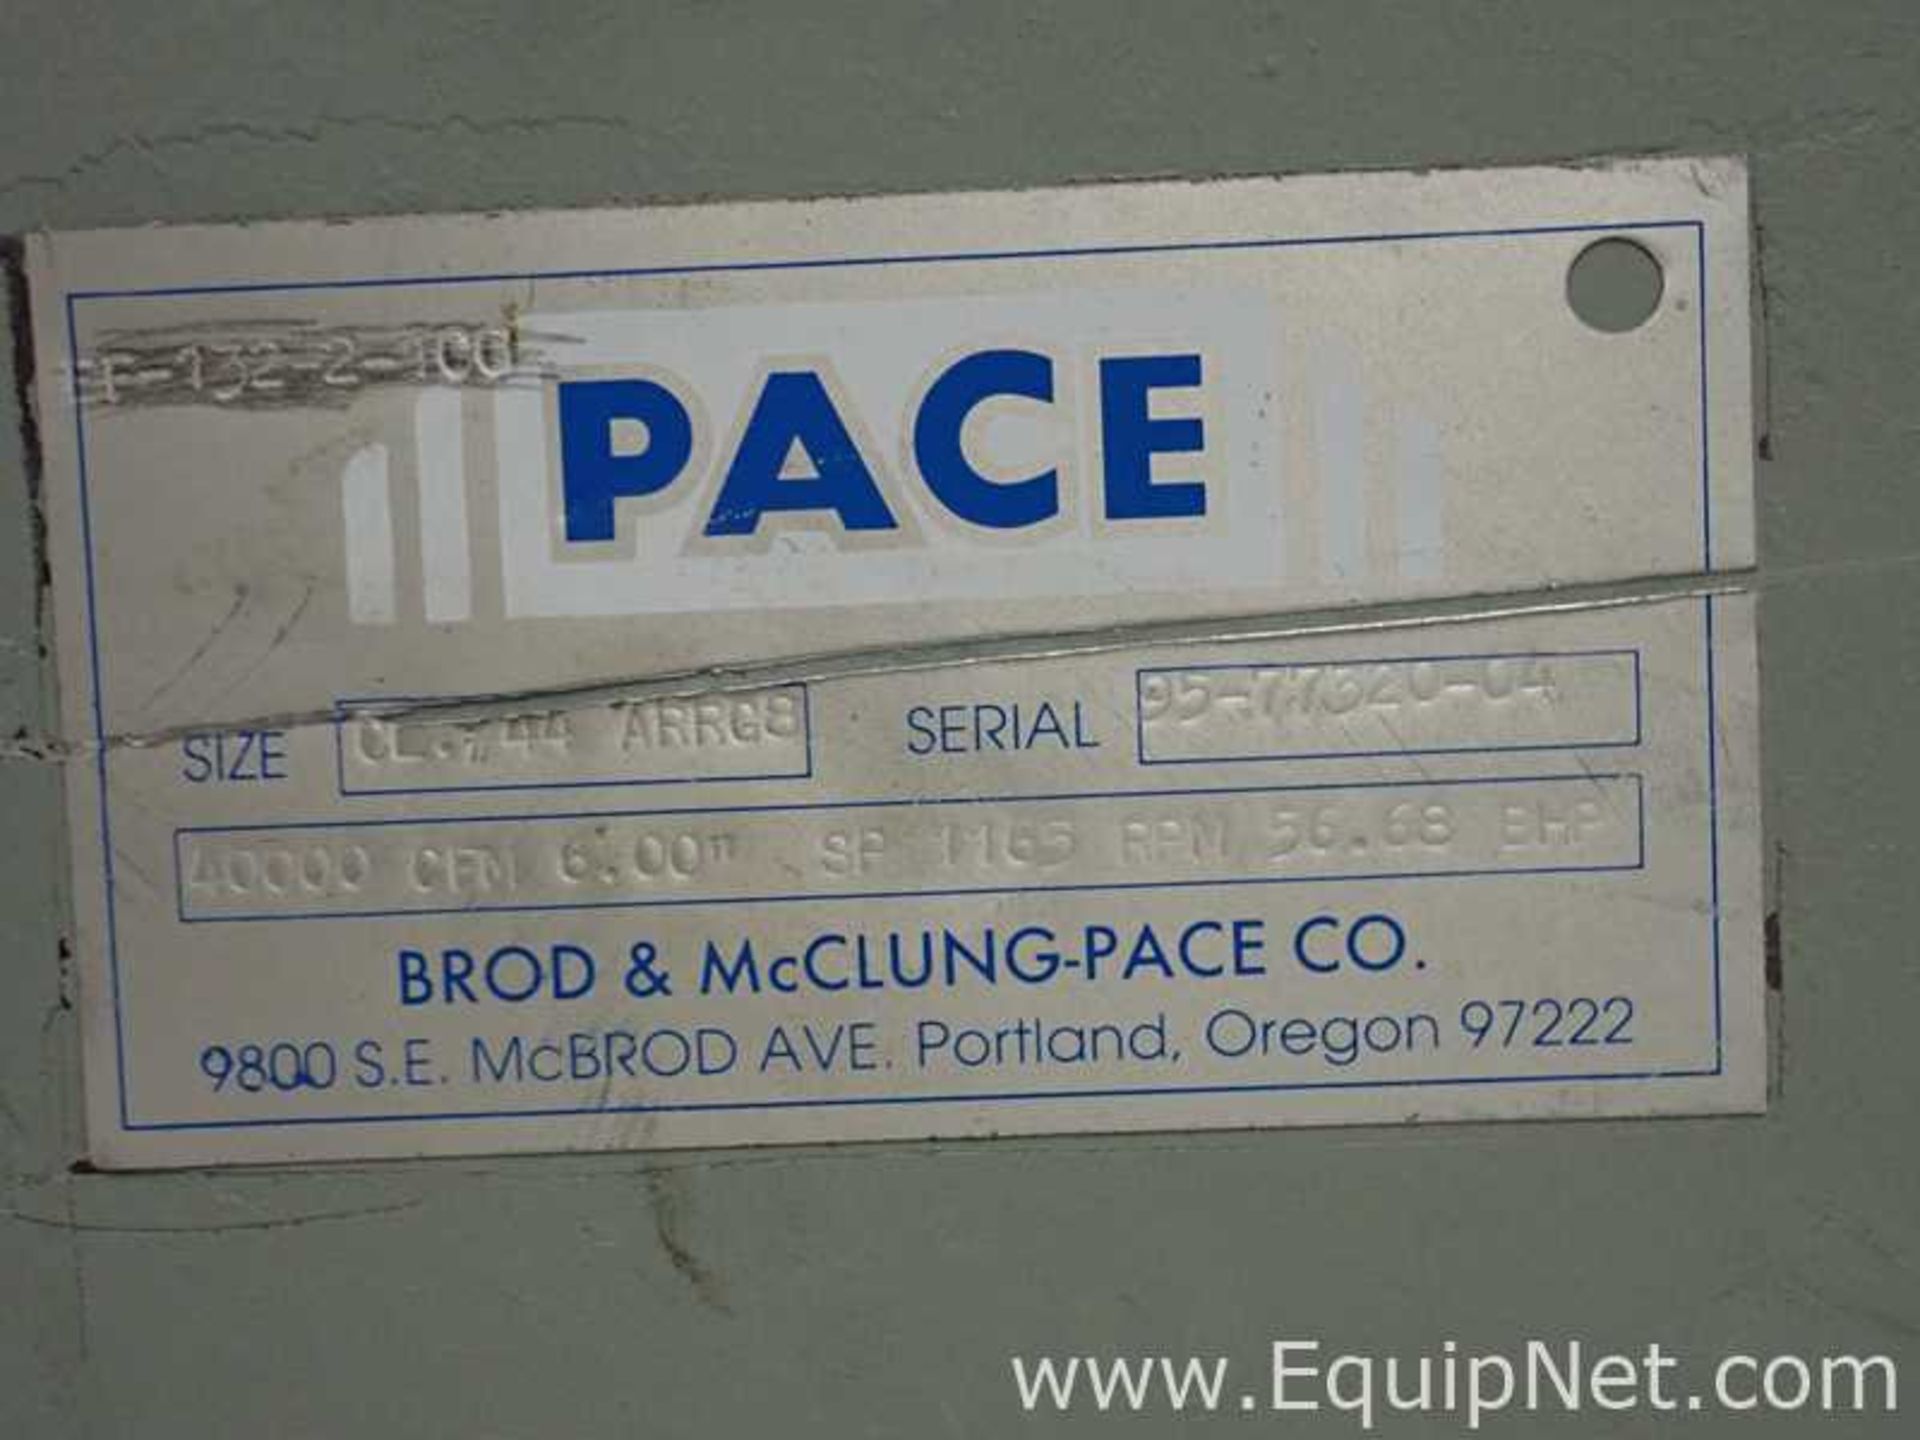 Pace Company CL 44ARRG8 General Air Handler Fan and Motor - Image 46 of 47